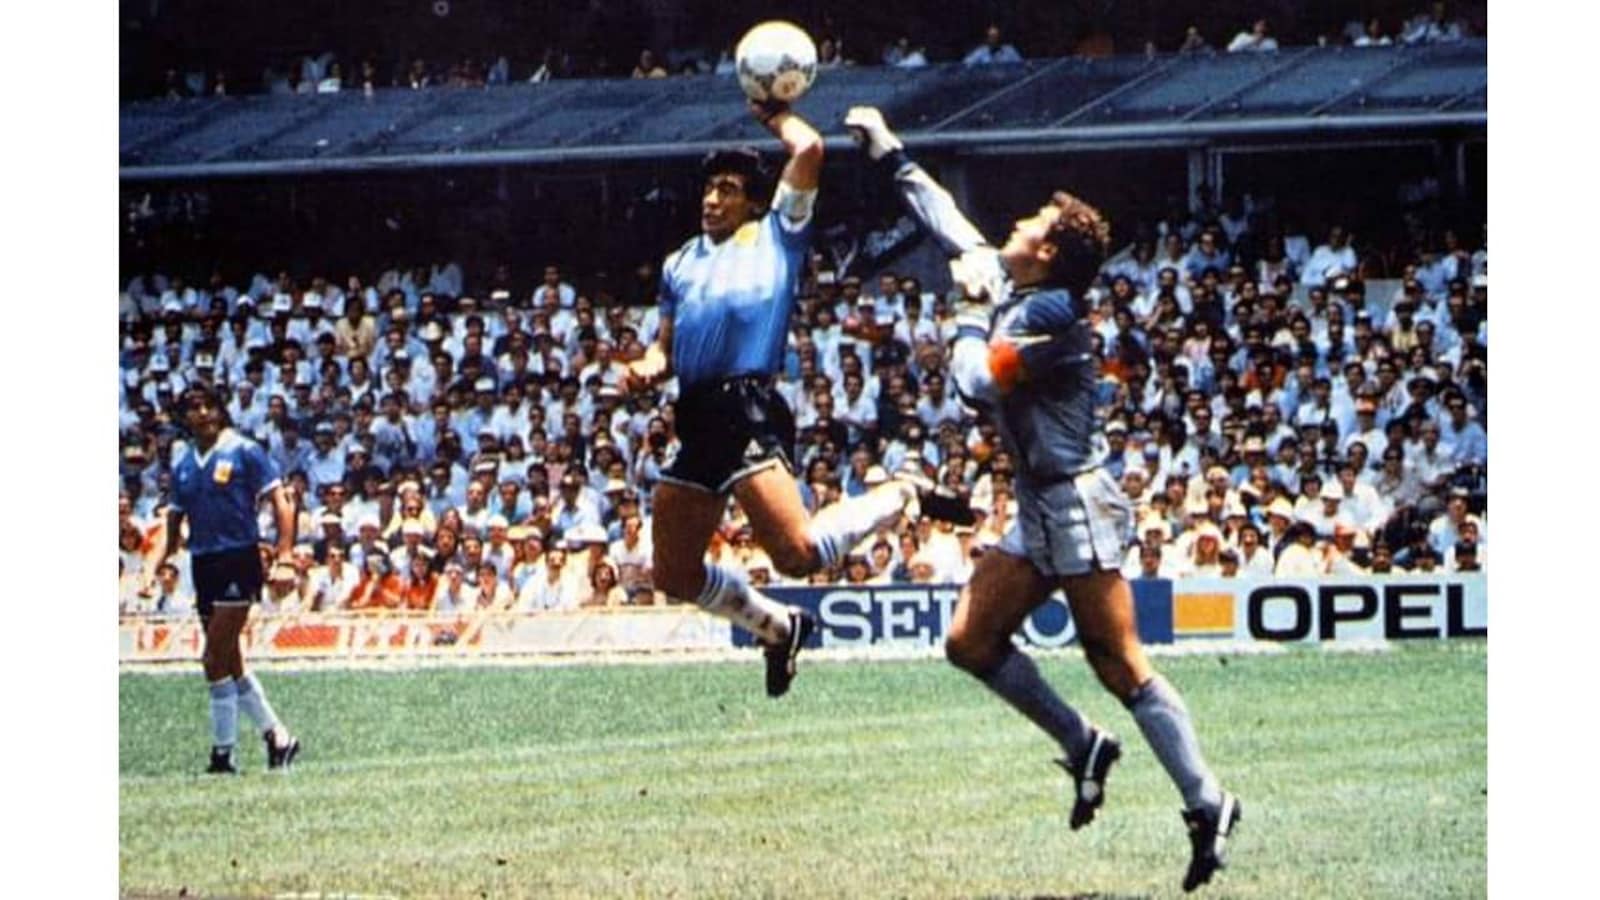 GOAL - Where does #Maradona rank in the list of the best players